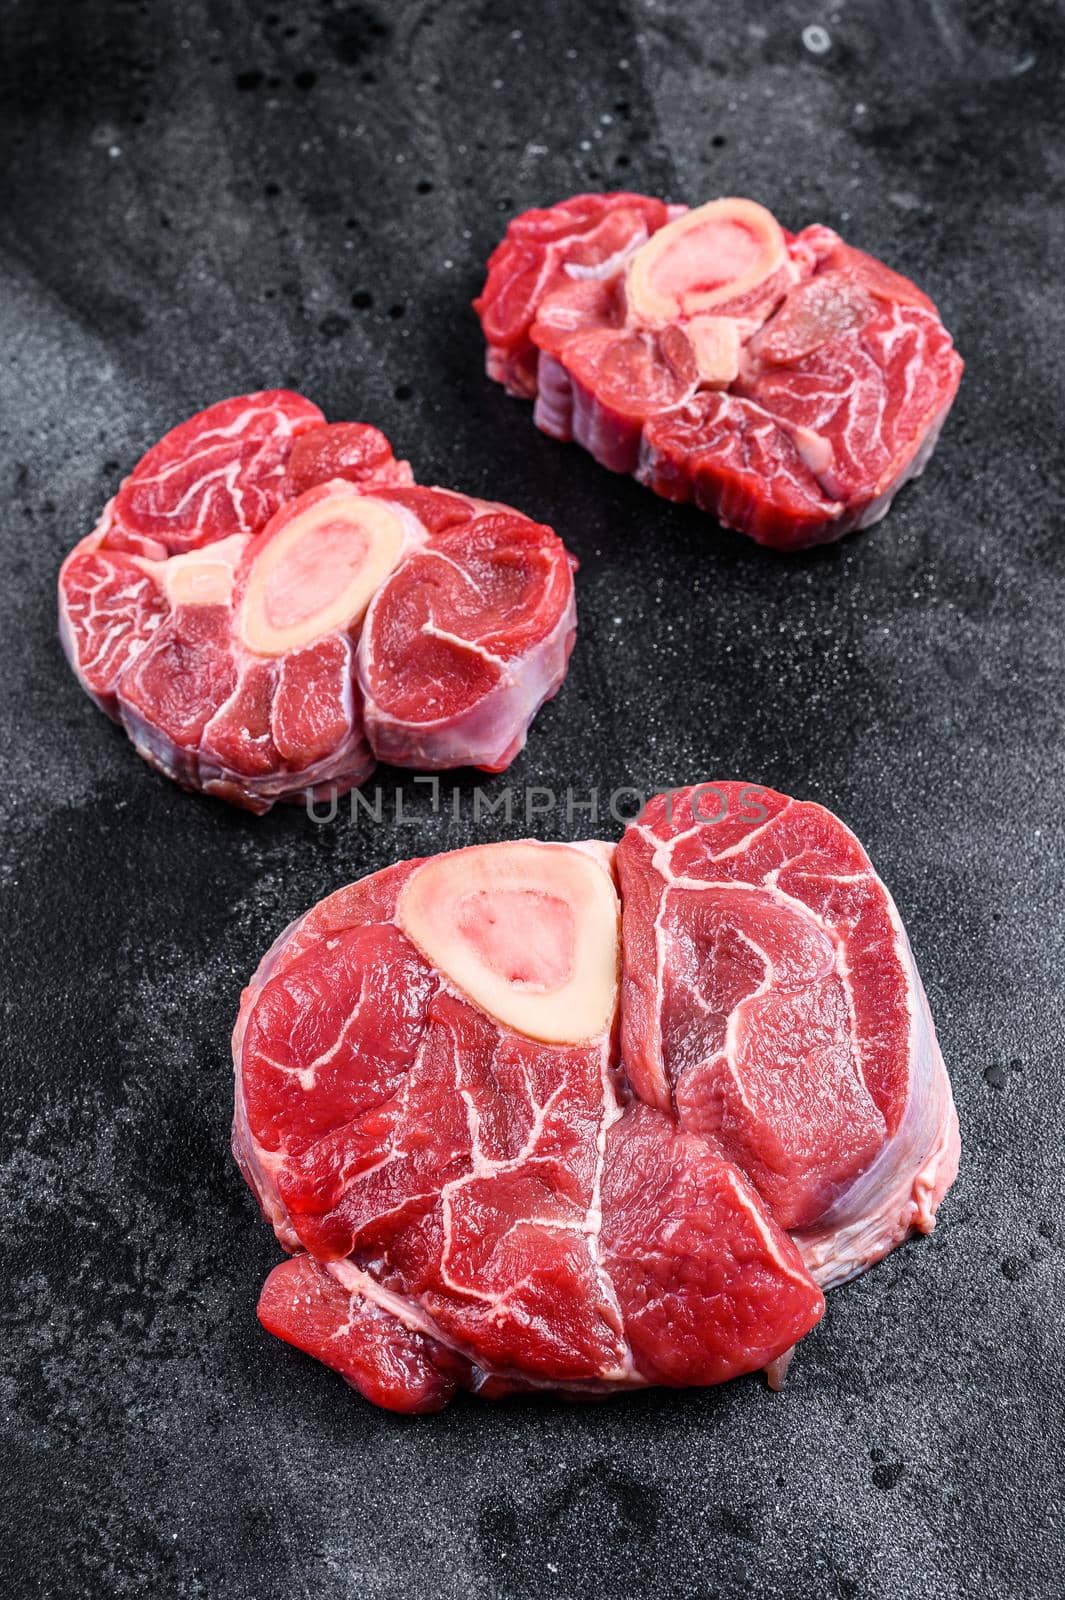 Fresh veal meat osso buco shank steak, italian ossobuco. Black background. Top view by Composter